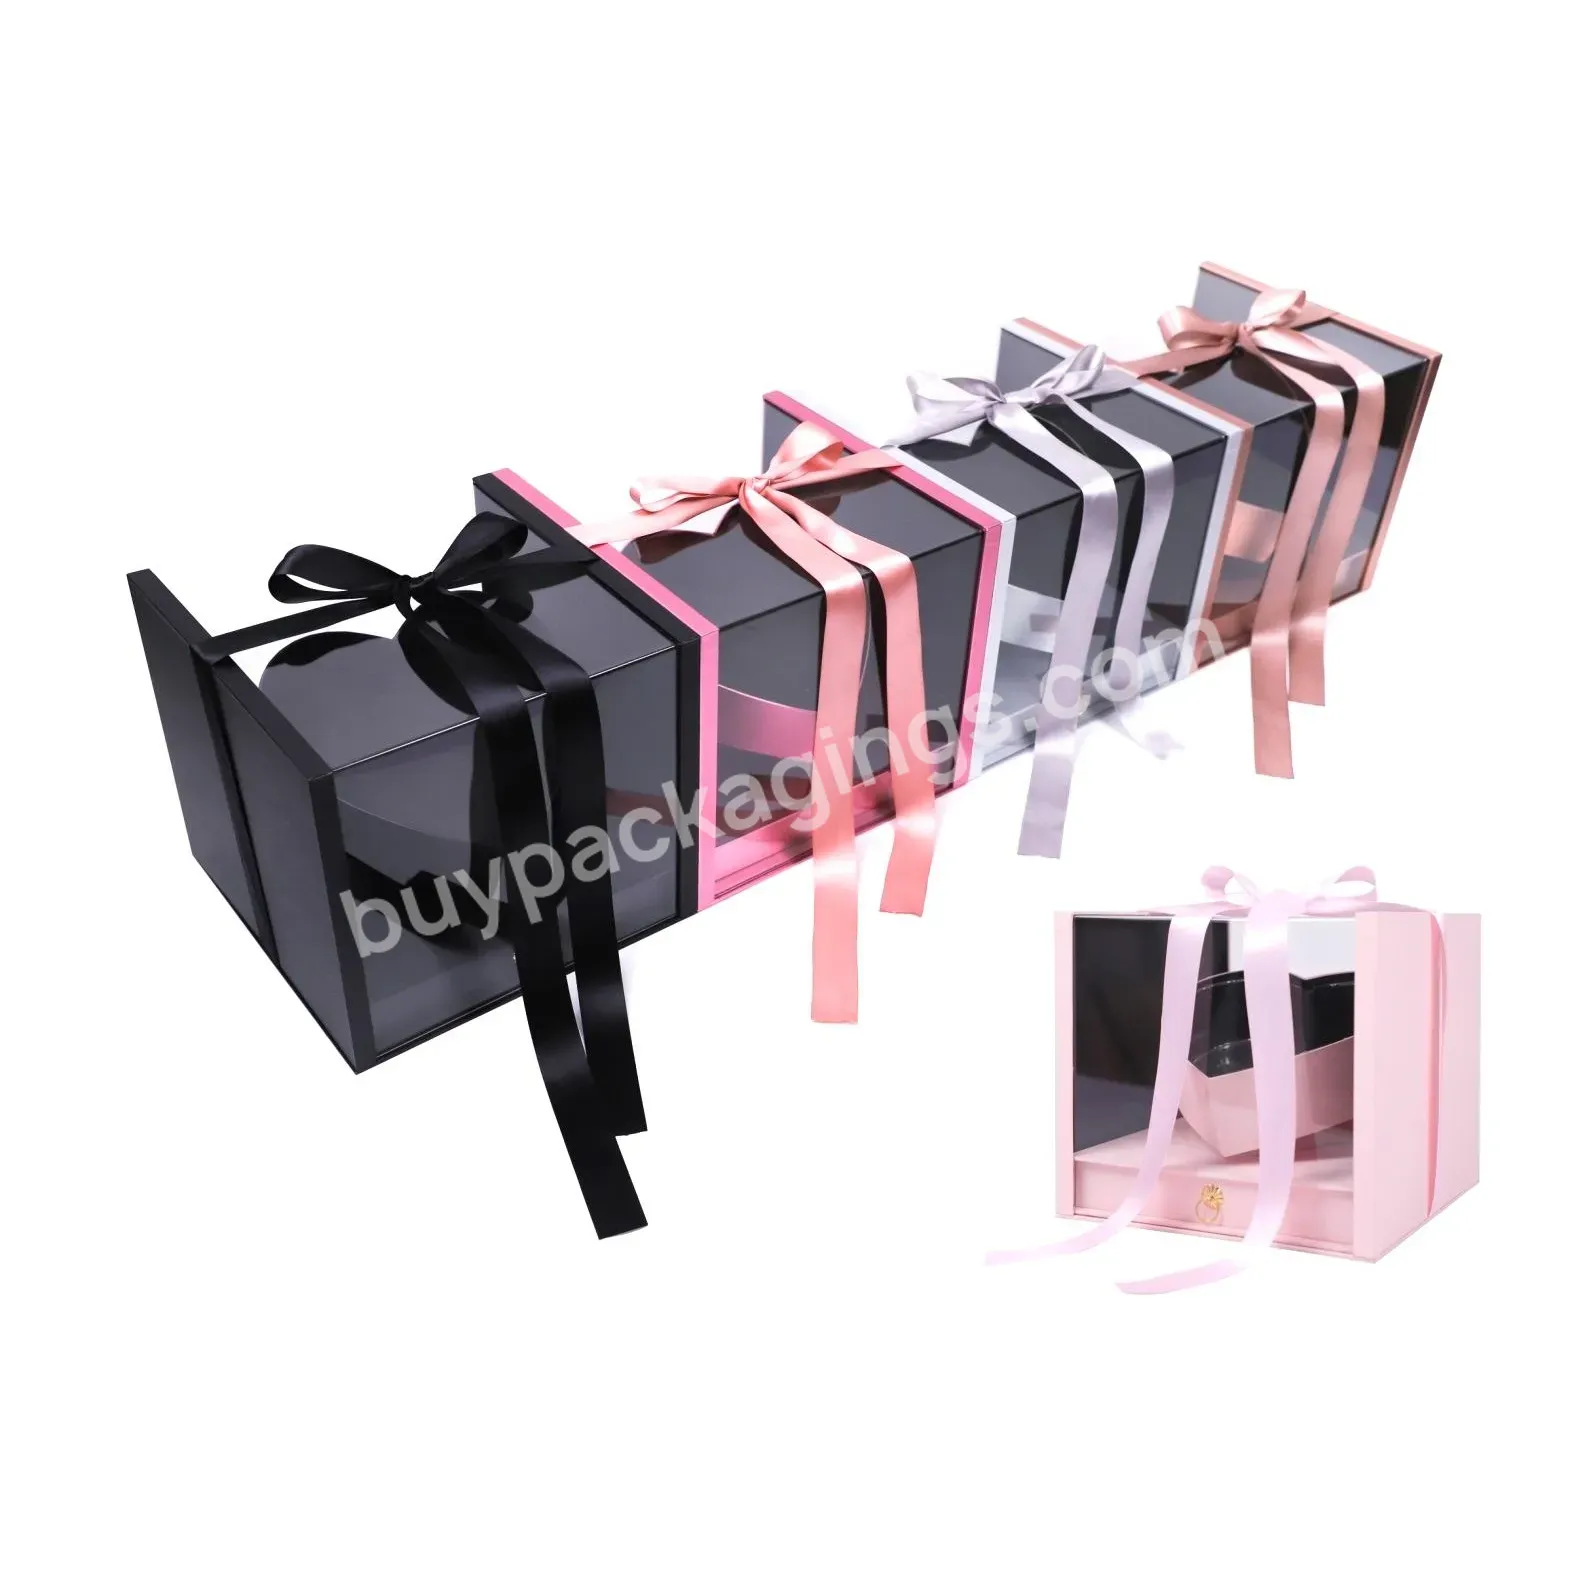 Surface Heavy Metal Finished Gift Box Magic Cube Flower Box Acrylic Box With Slotted Heart - Buy Surface Heavy Metal Finished Gift Box,Magic Cube Flower Box,Acrylic Box With Slotted Heart.